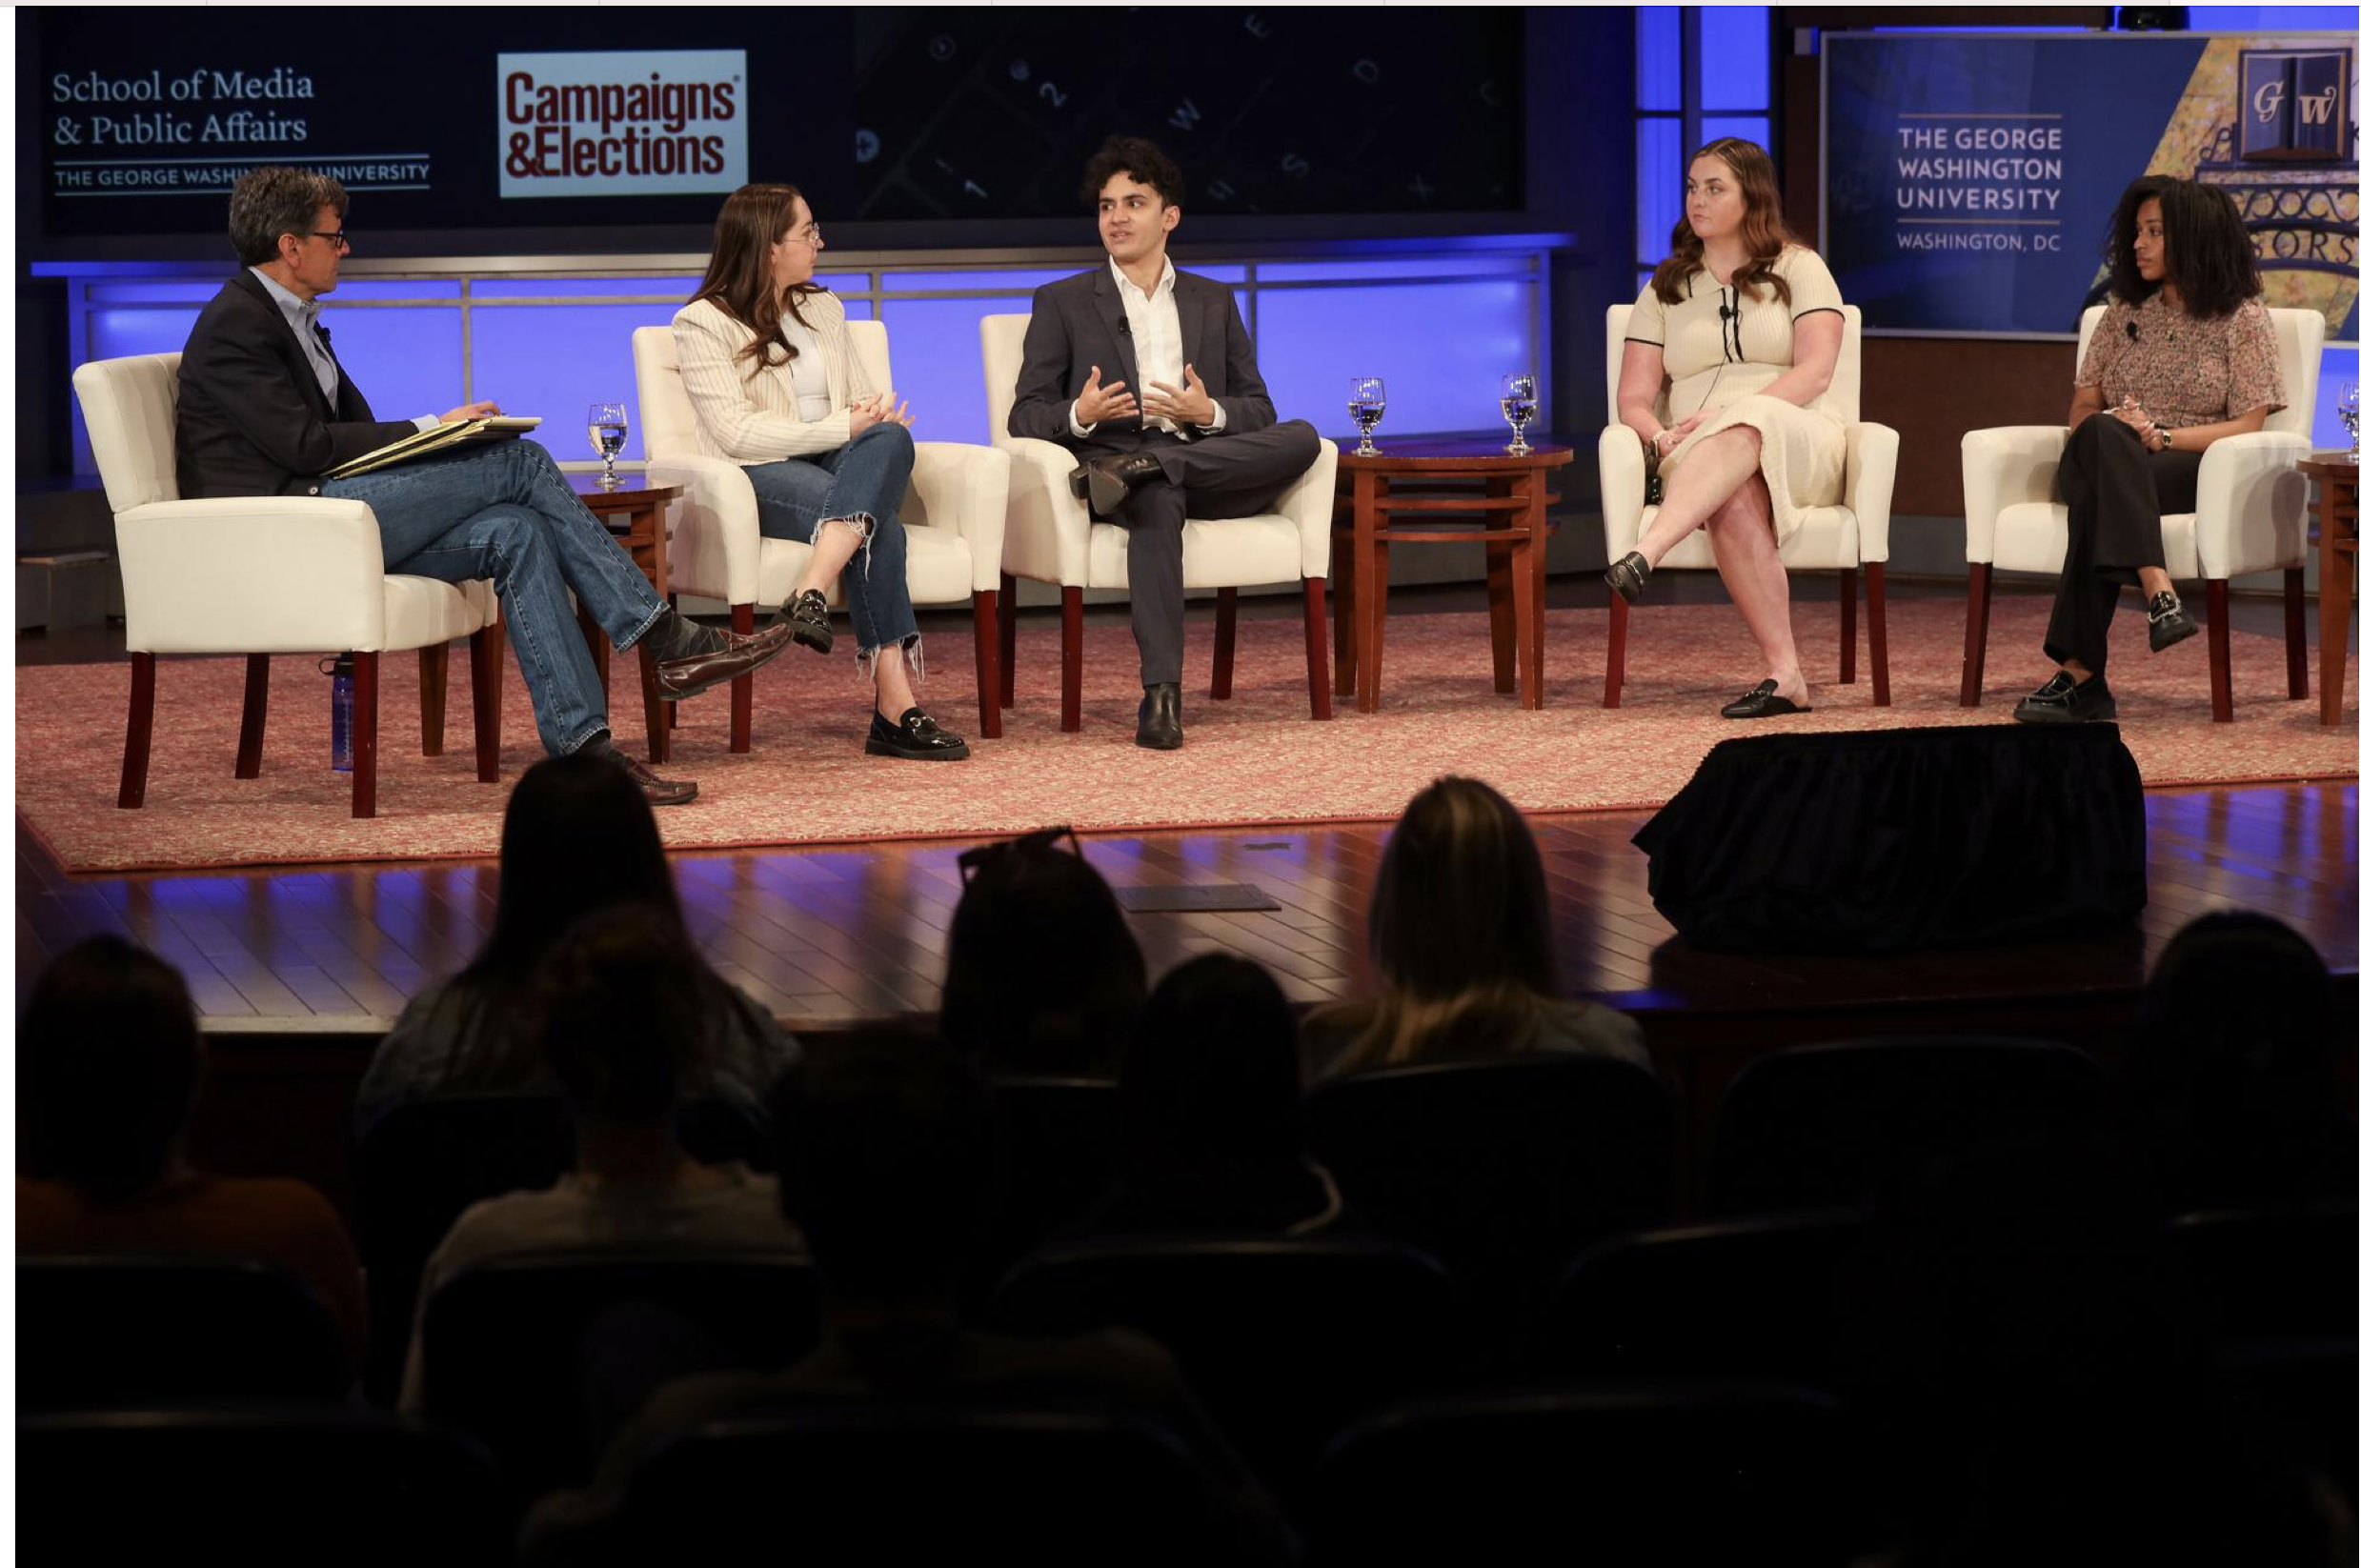 From left: Peter Loge, Madeline Twomey, Nicholas Anastácio, Liz Ring and Sonia Howell. (Lily Speredelozzi/GW Today)